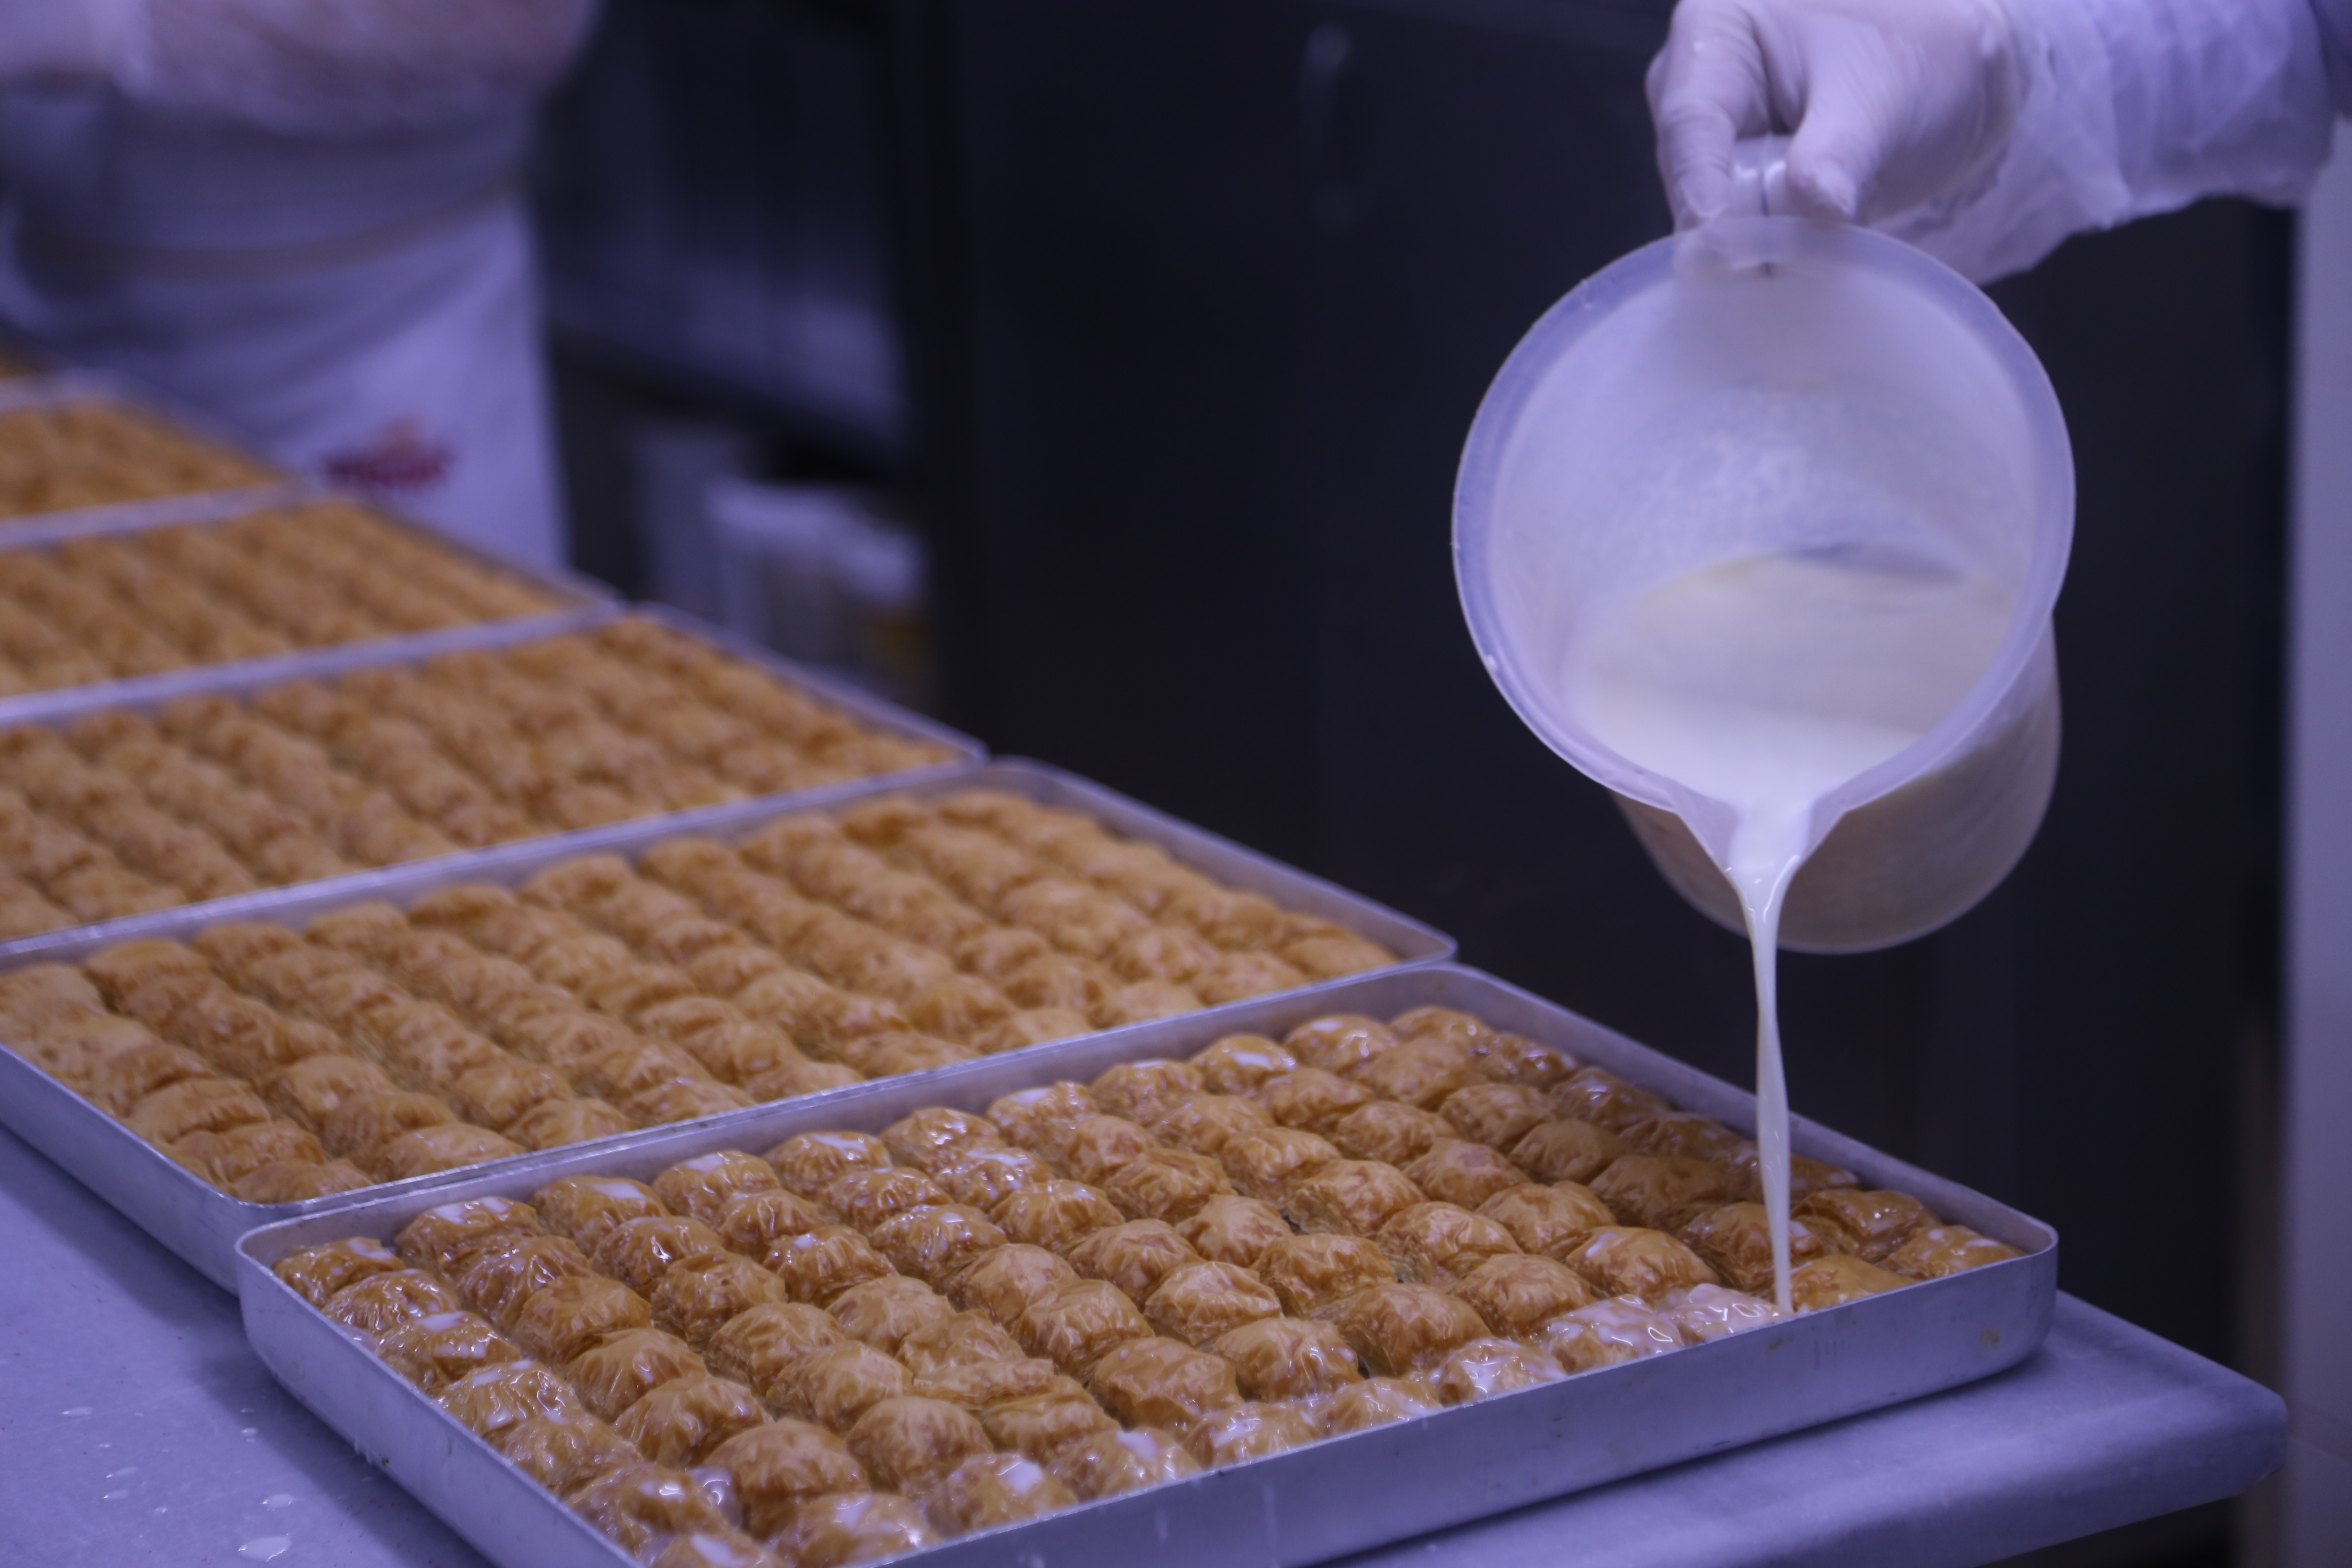 Bakers, cakes and baklava: Mouthwatering Ramadan delights in Turkey